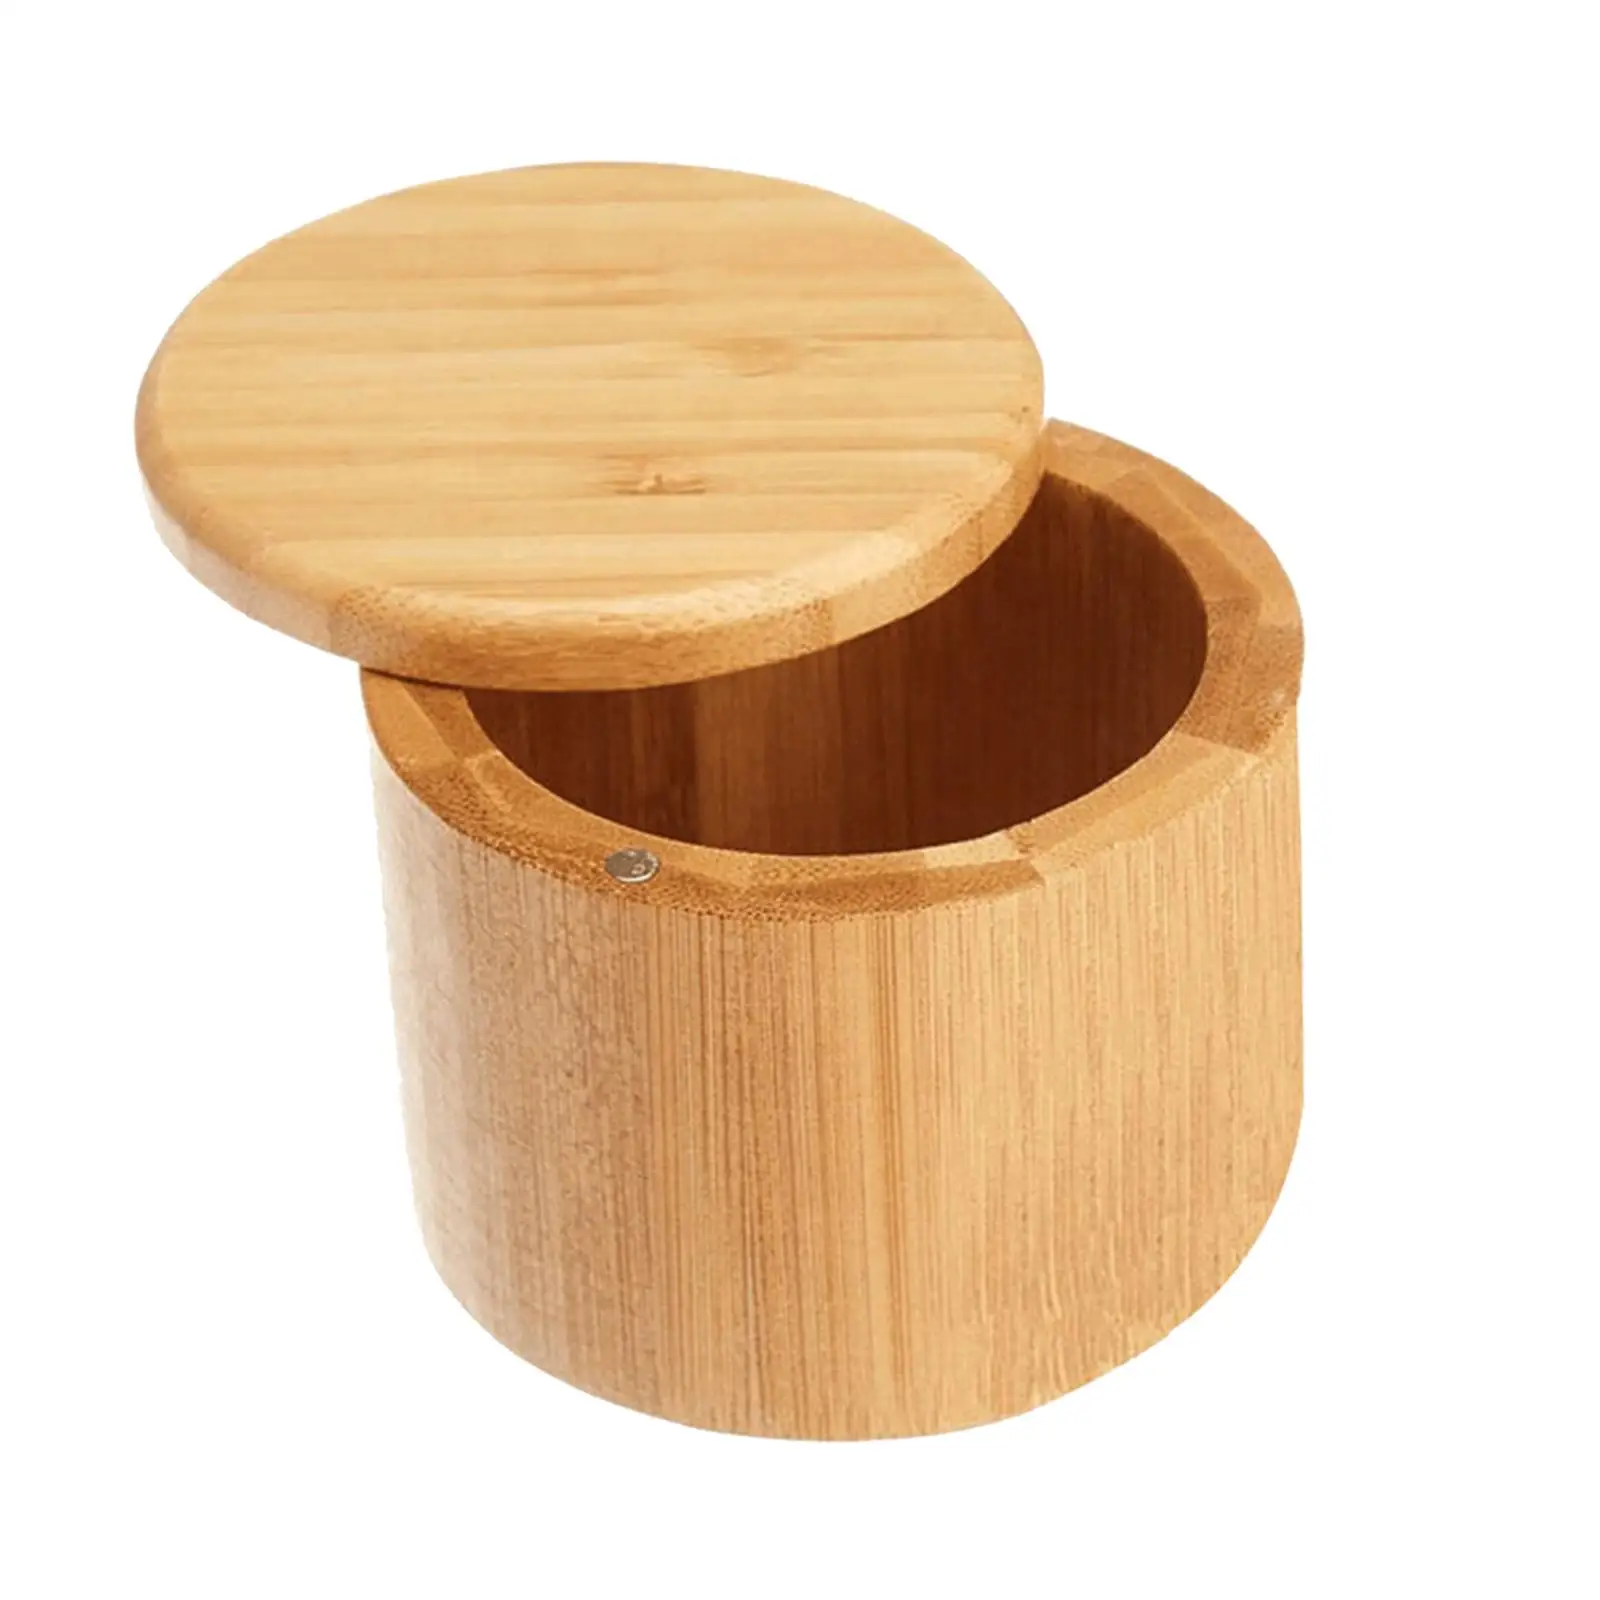 Seasoning Box Kitchen Tool Sugar Bowl Bamboo Pepper Salt Box Storage Canister for Baking Parties Household Kitchens Hotels